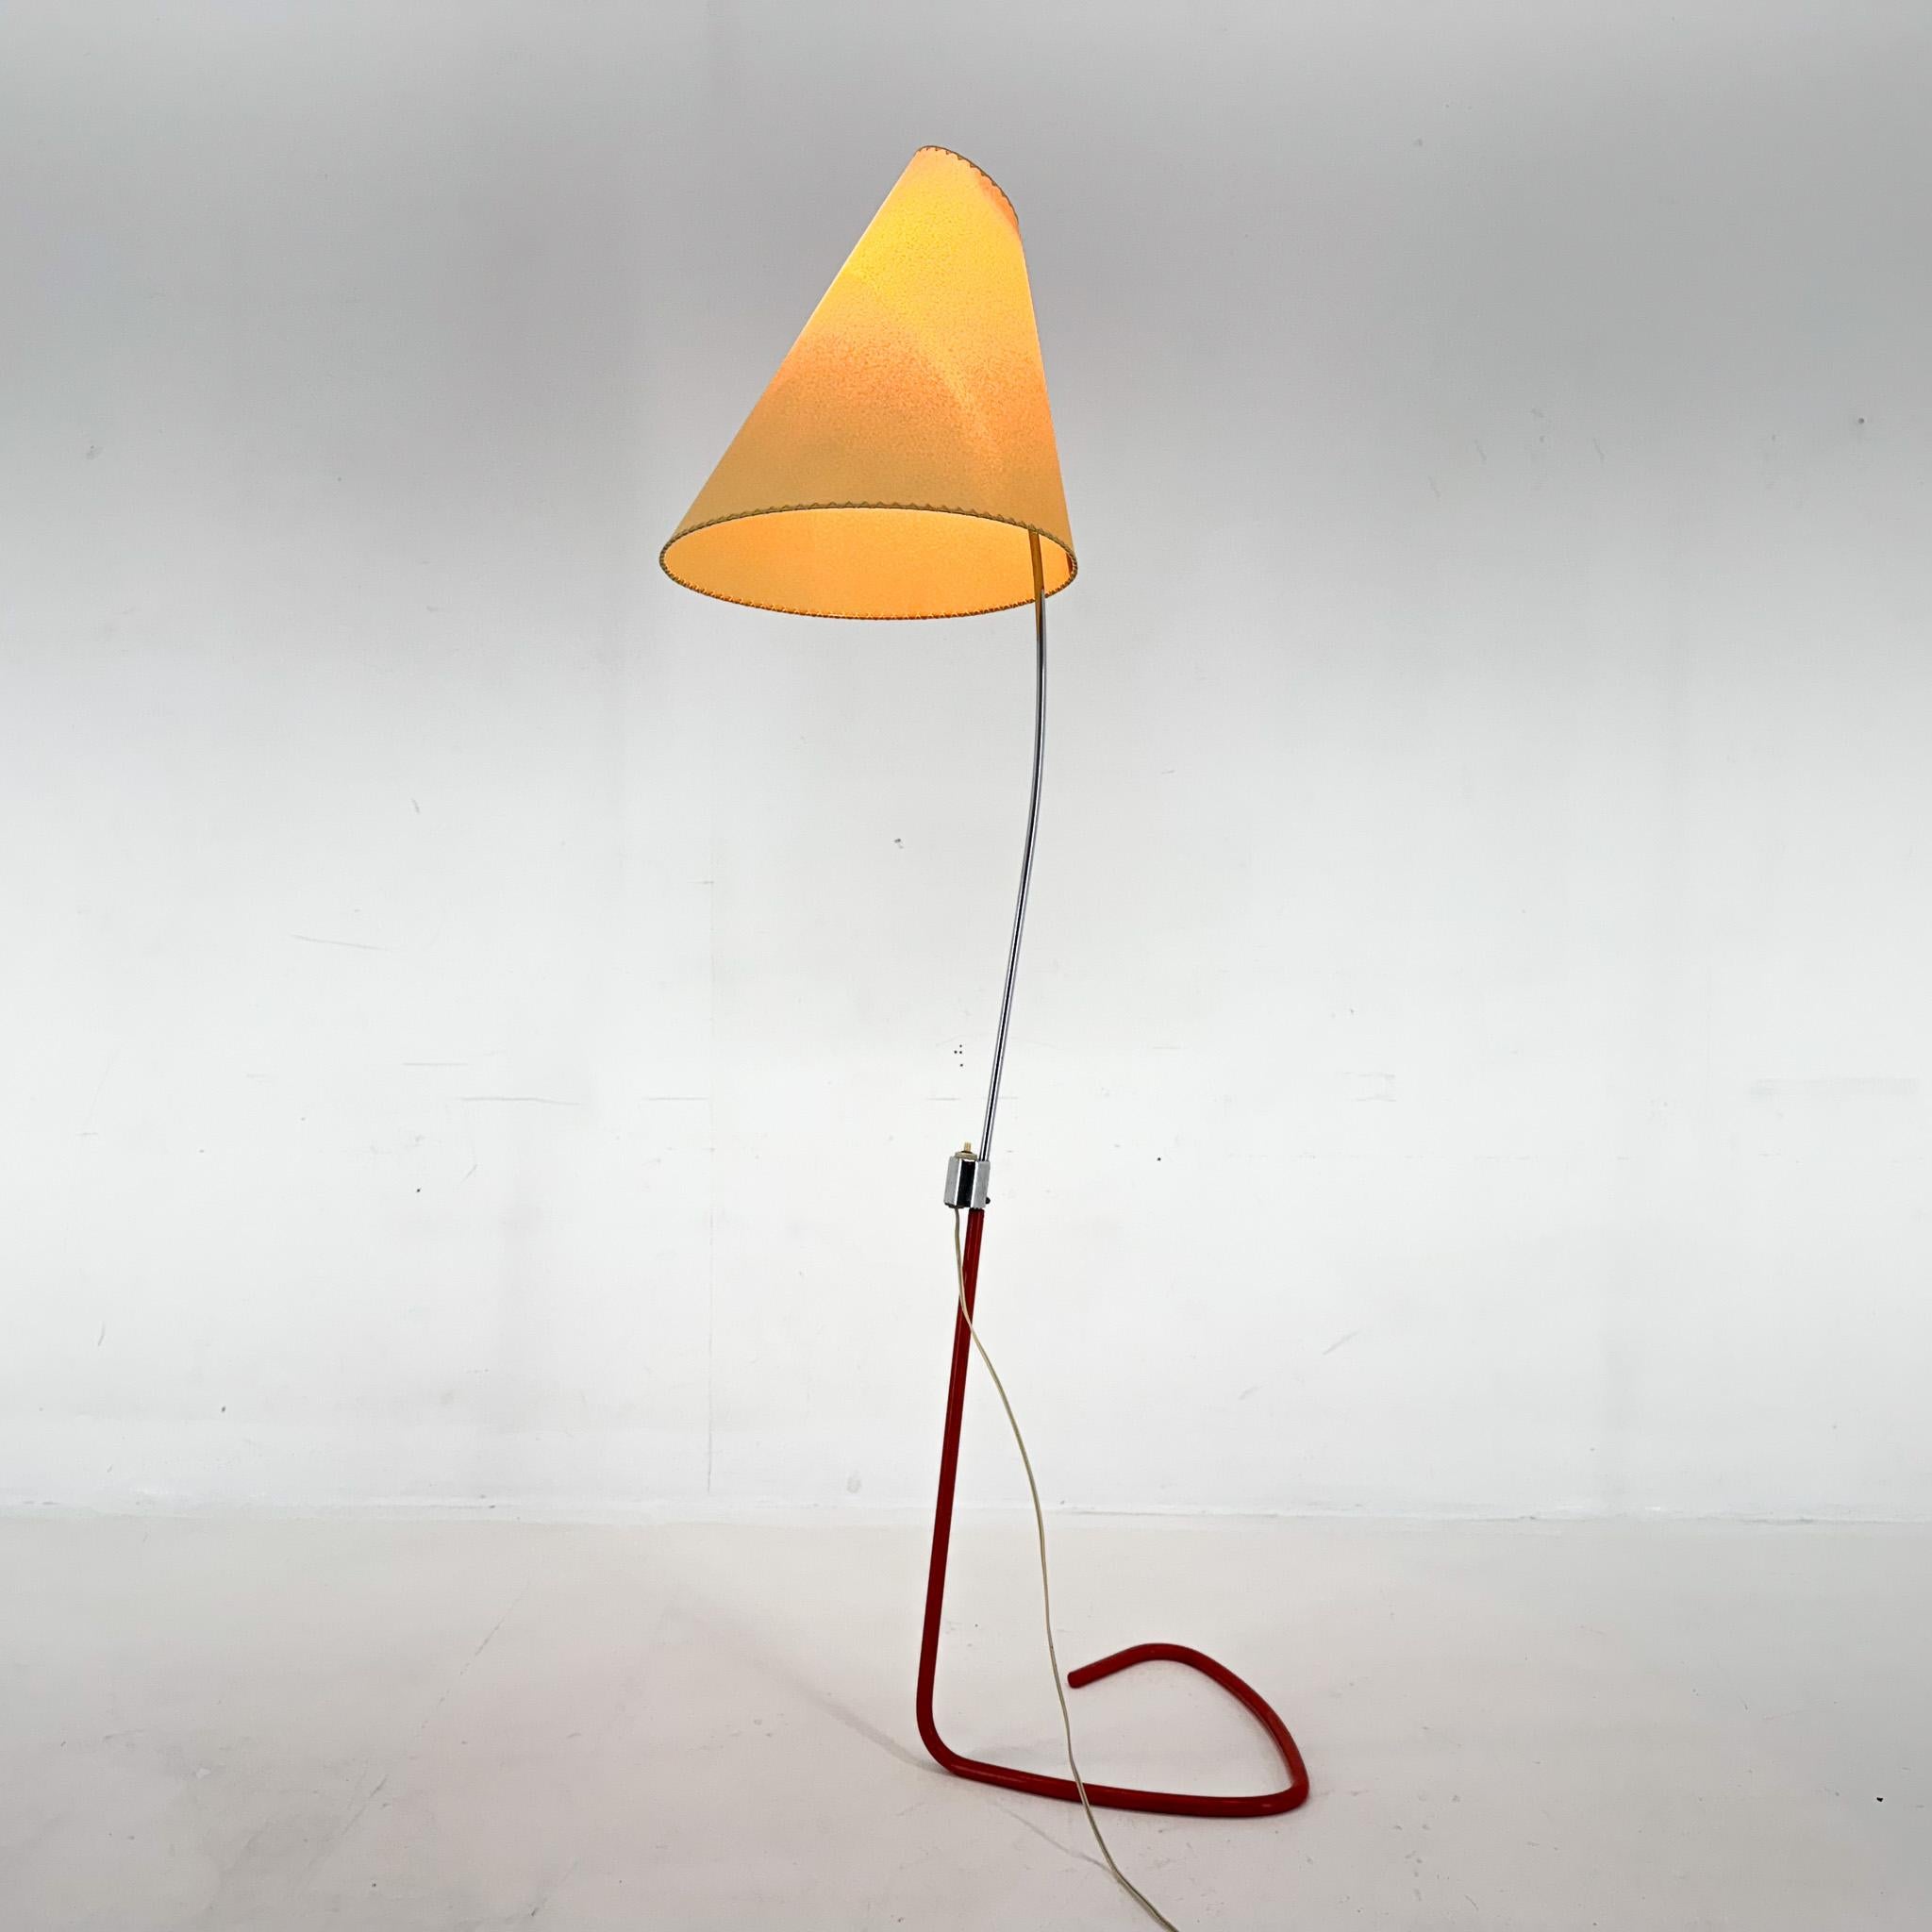 Very rare vintage floor lamp designed by famous Josef Hurka and produced by Napako in the 1960's in former Czechoslovakia. Original, fully functional wiring, new parchment lamp shade. 
Bulb 1 x E26 - E27. US adapter included.